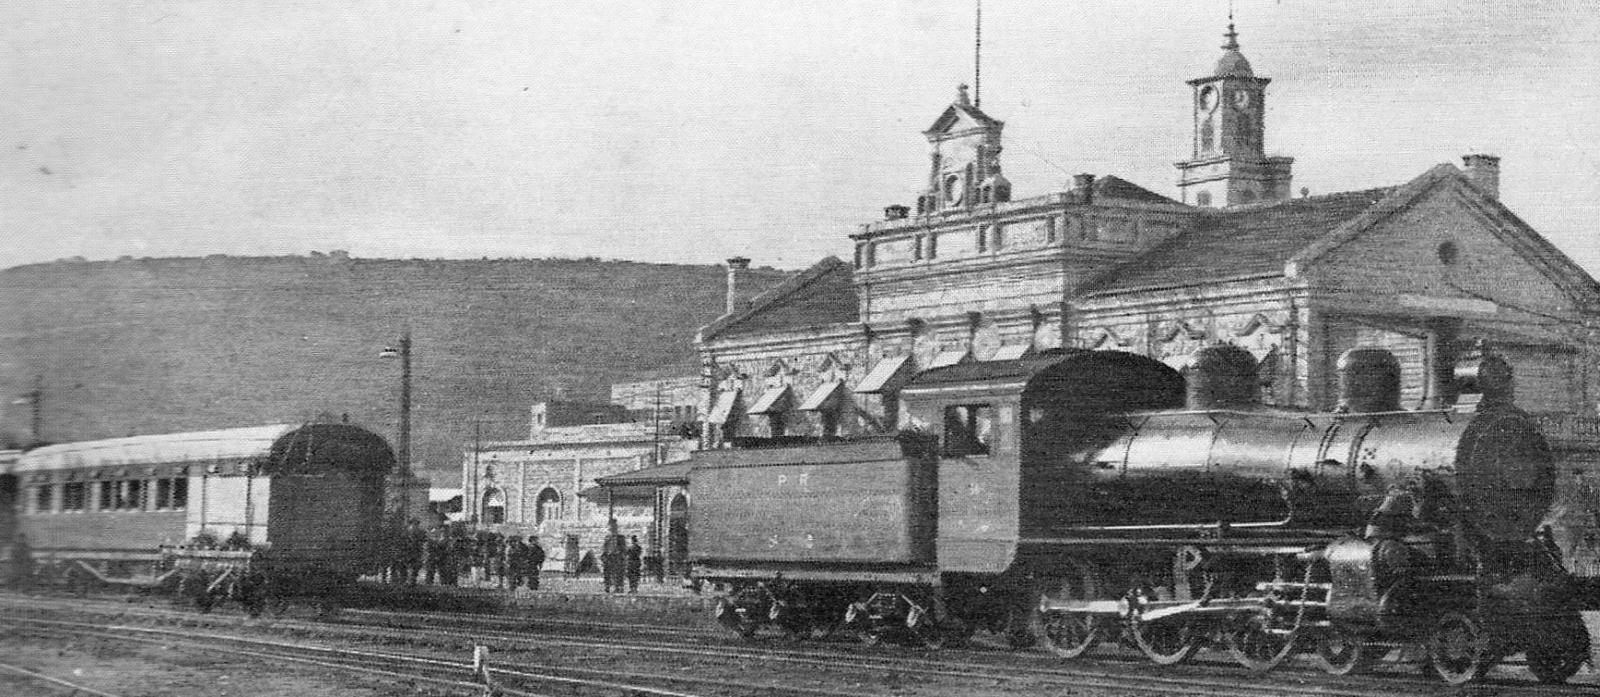 A specimen in 1931 at the Haifa East railway station